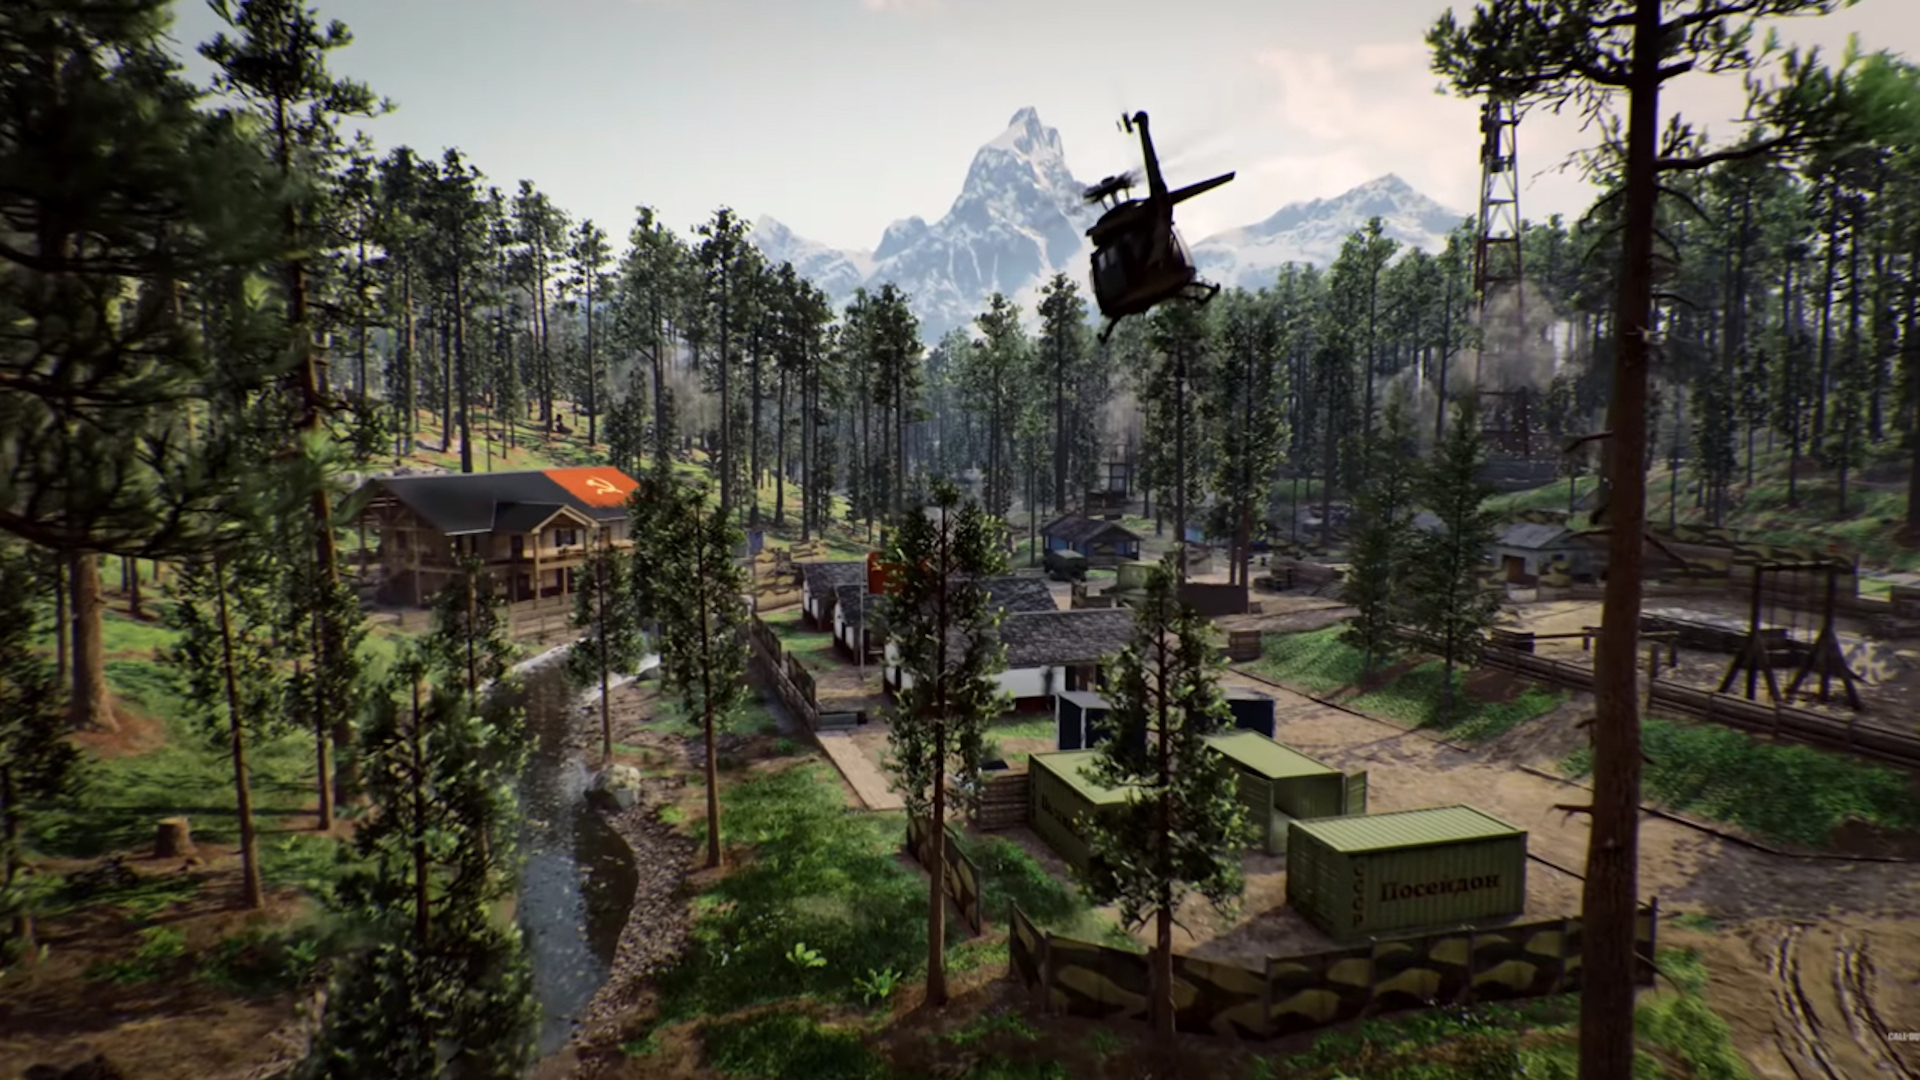 Call of Duty Black Ops Cold War multiplayer maps: A heavily forested area with a few shipping containers and buildings, with a helicopter flying overhead.